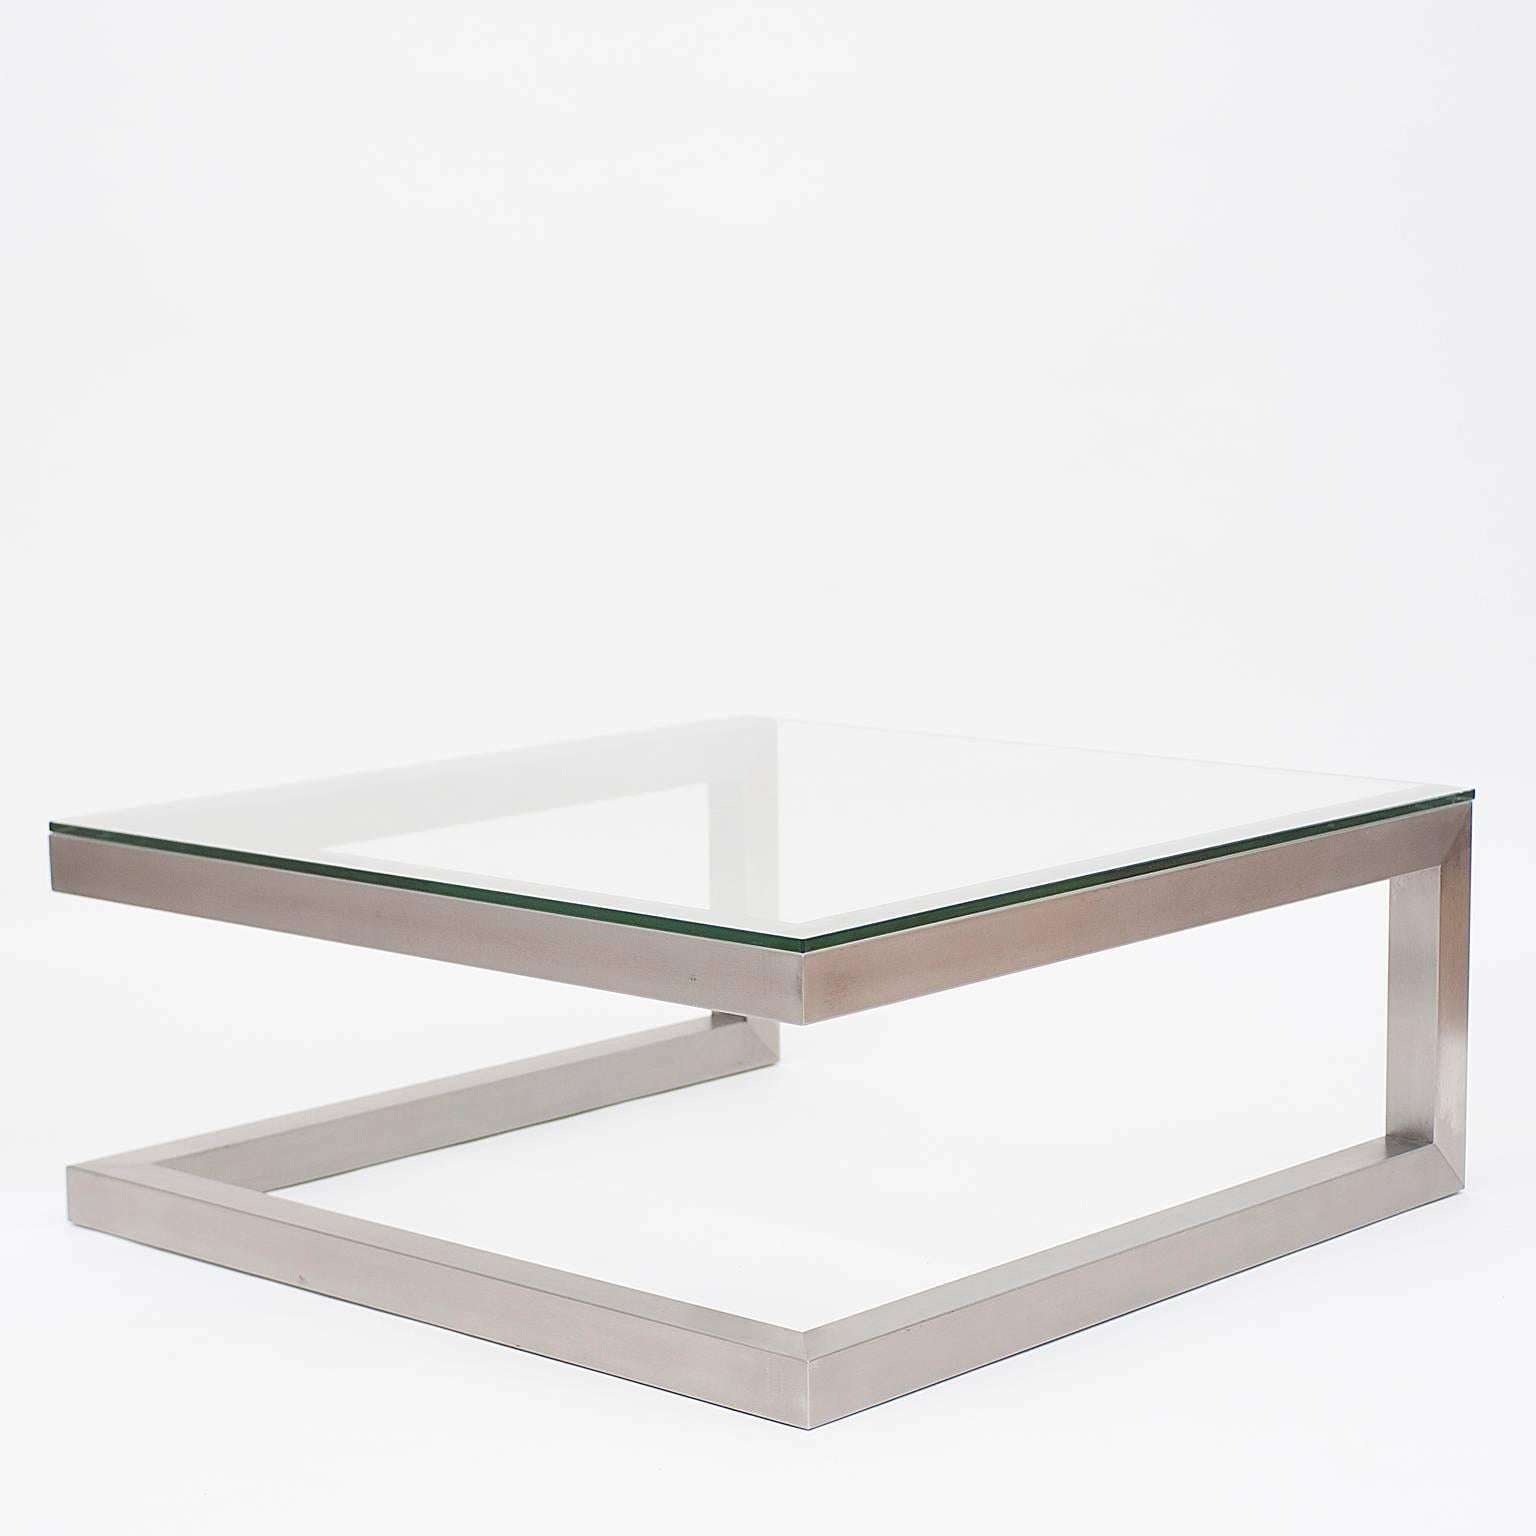 Steel and glass coffee table.